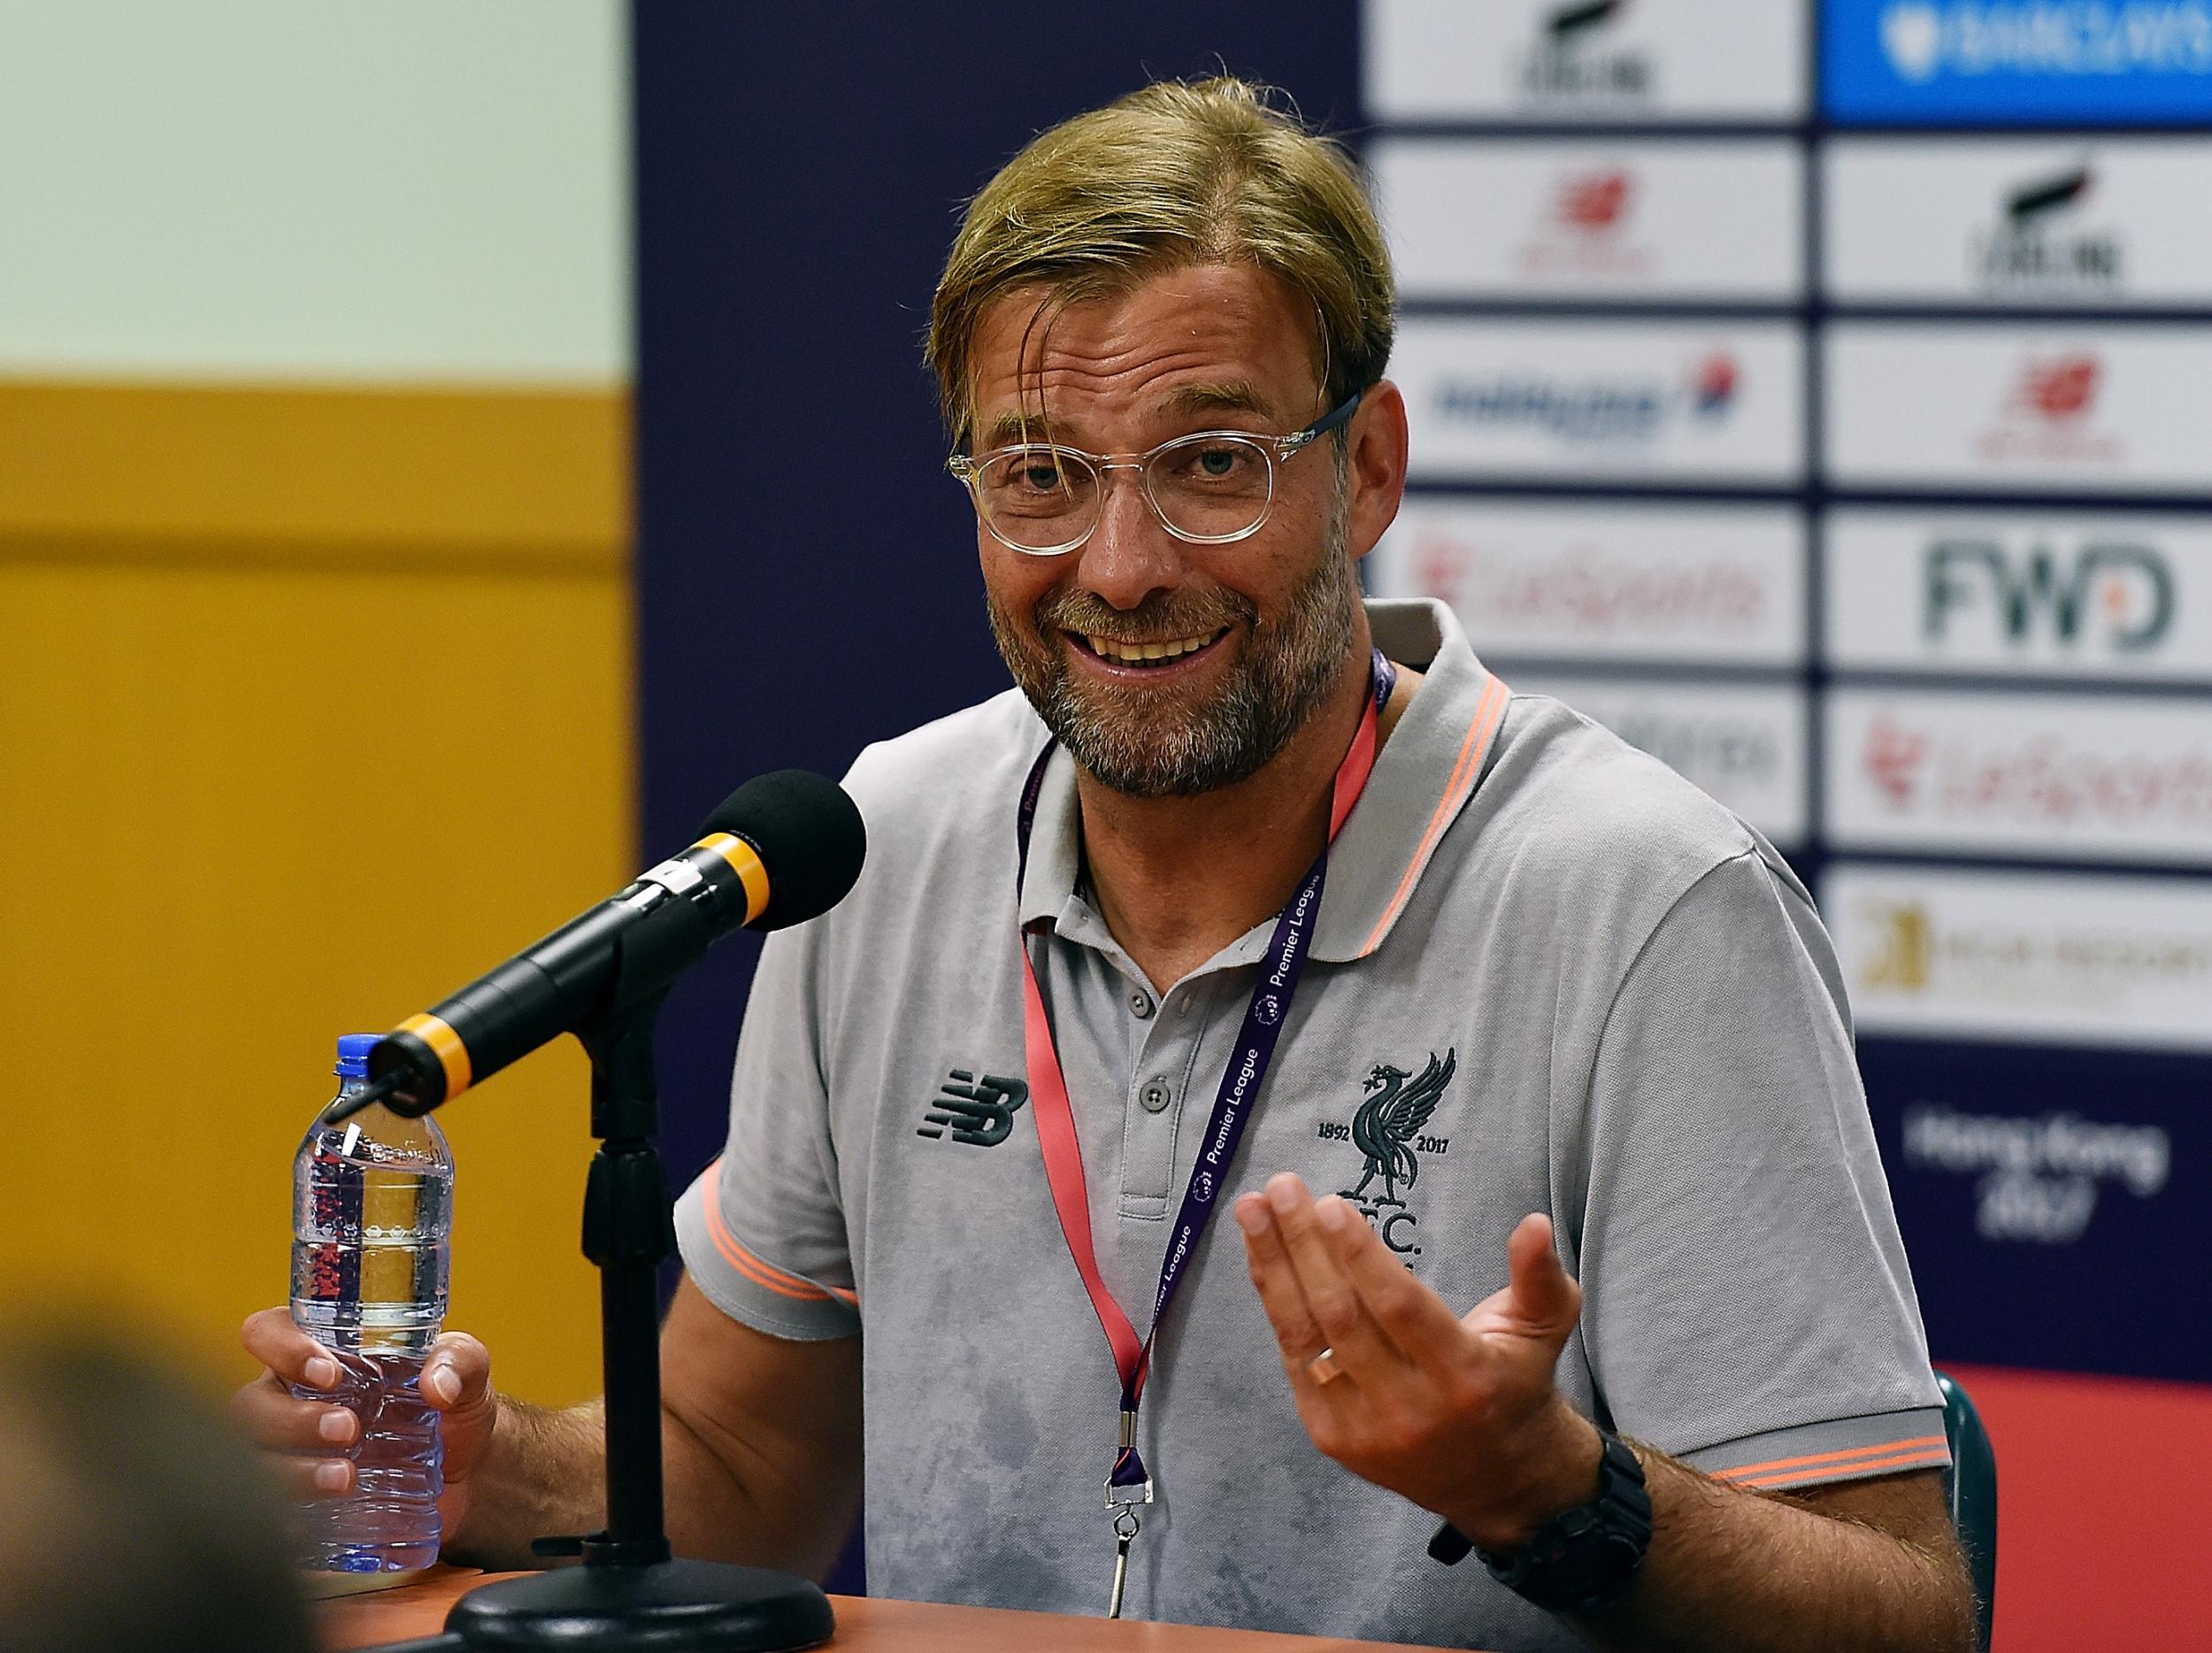 Klopp was speaking after Liverpool's win over Crystal Palace